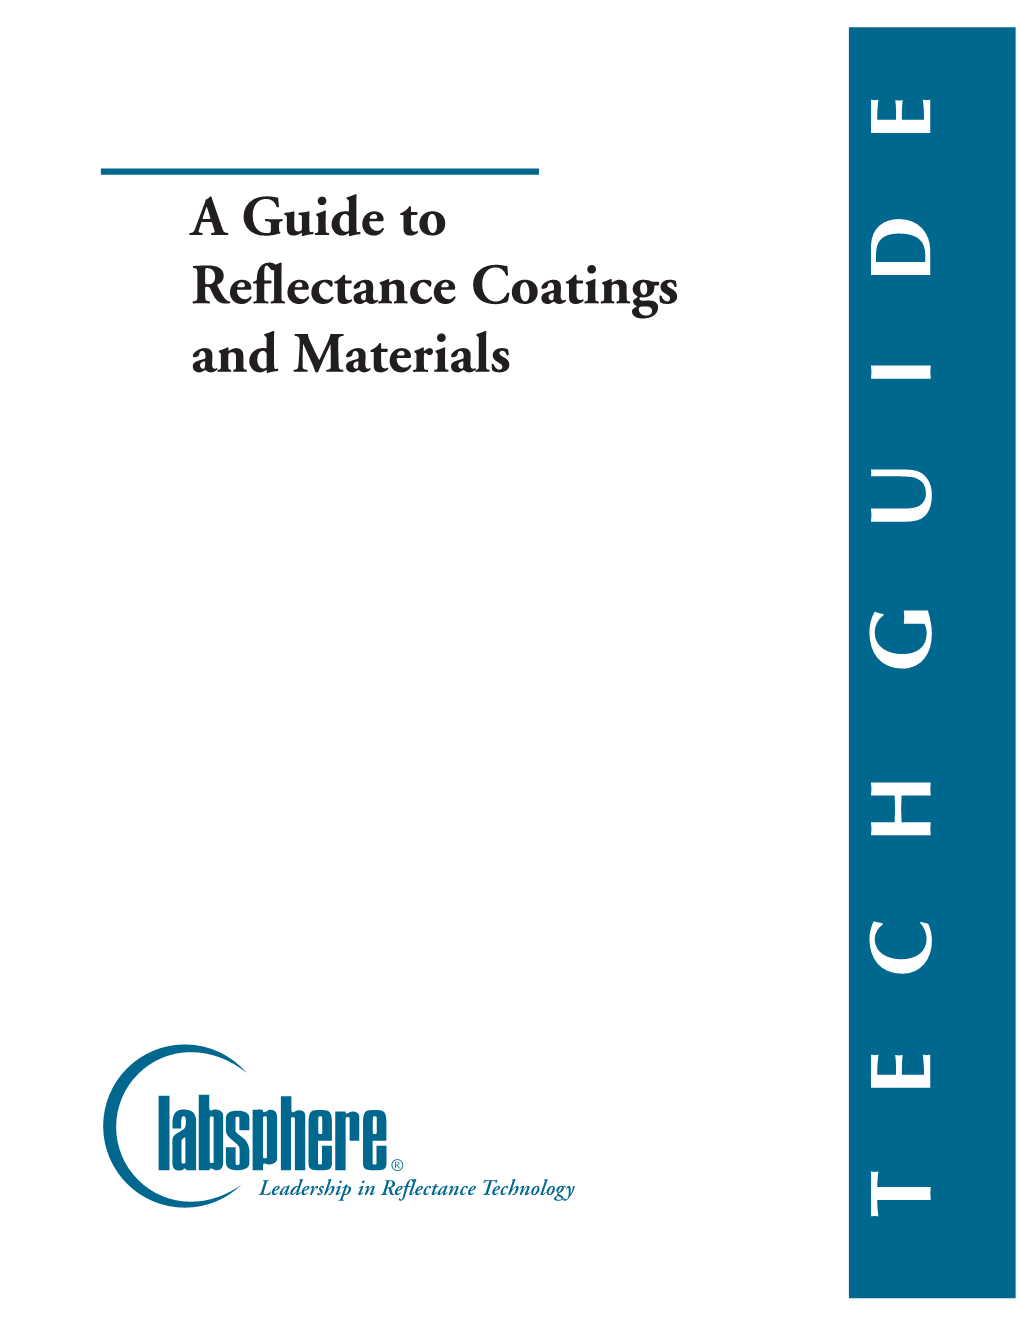 Guide to Reflectance Coatings and Materials